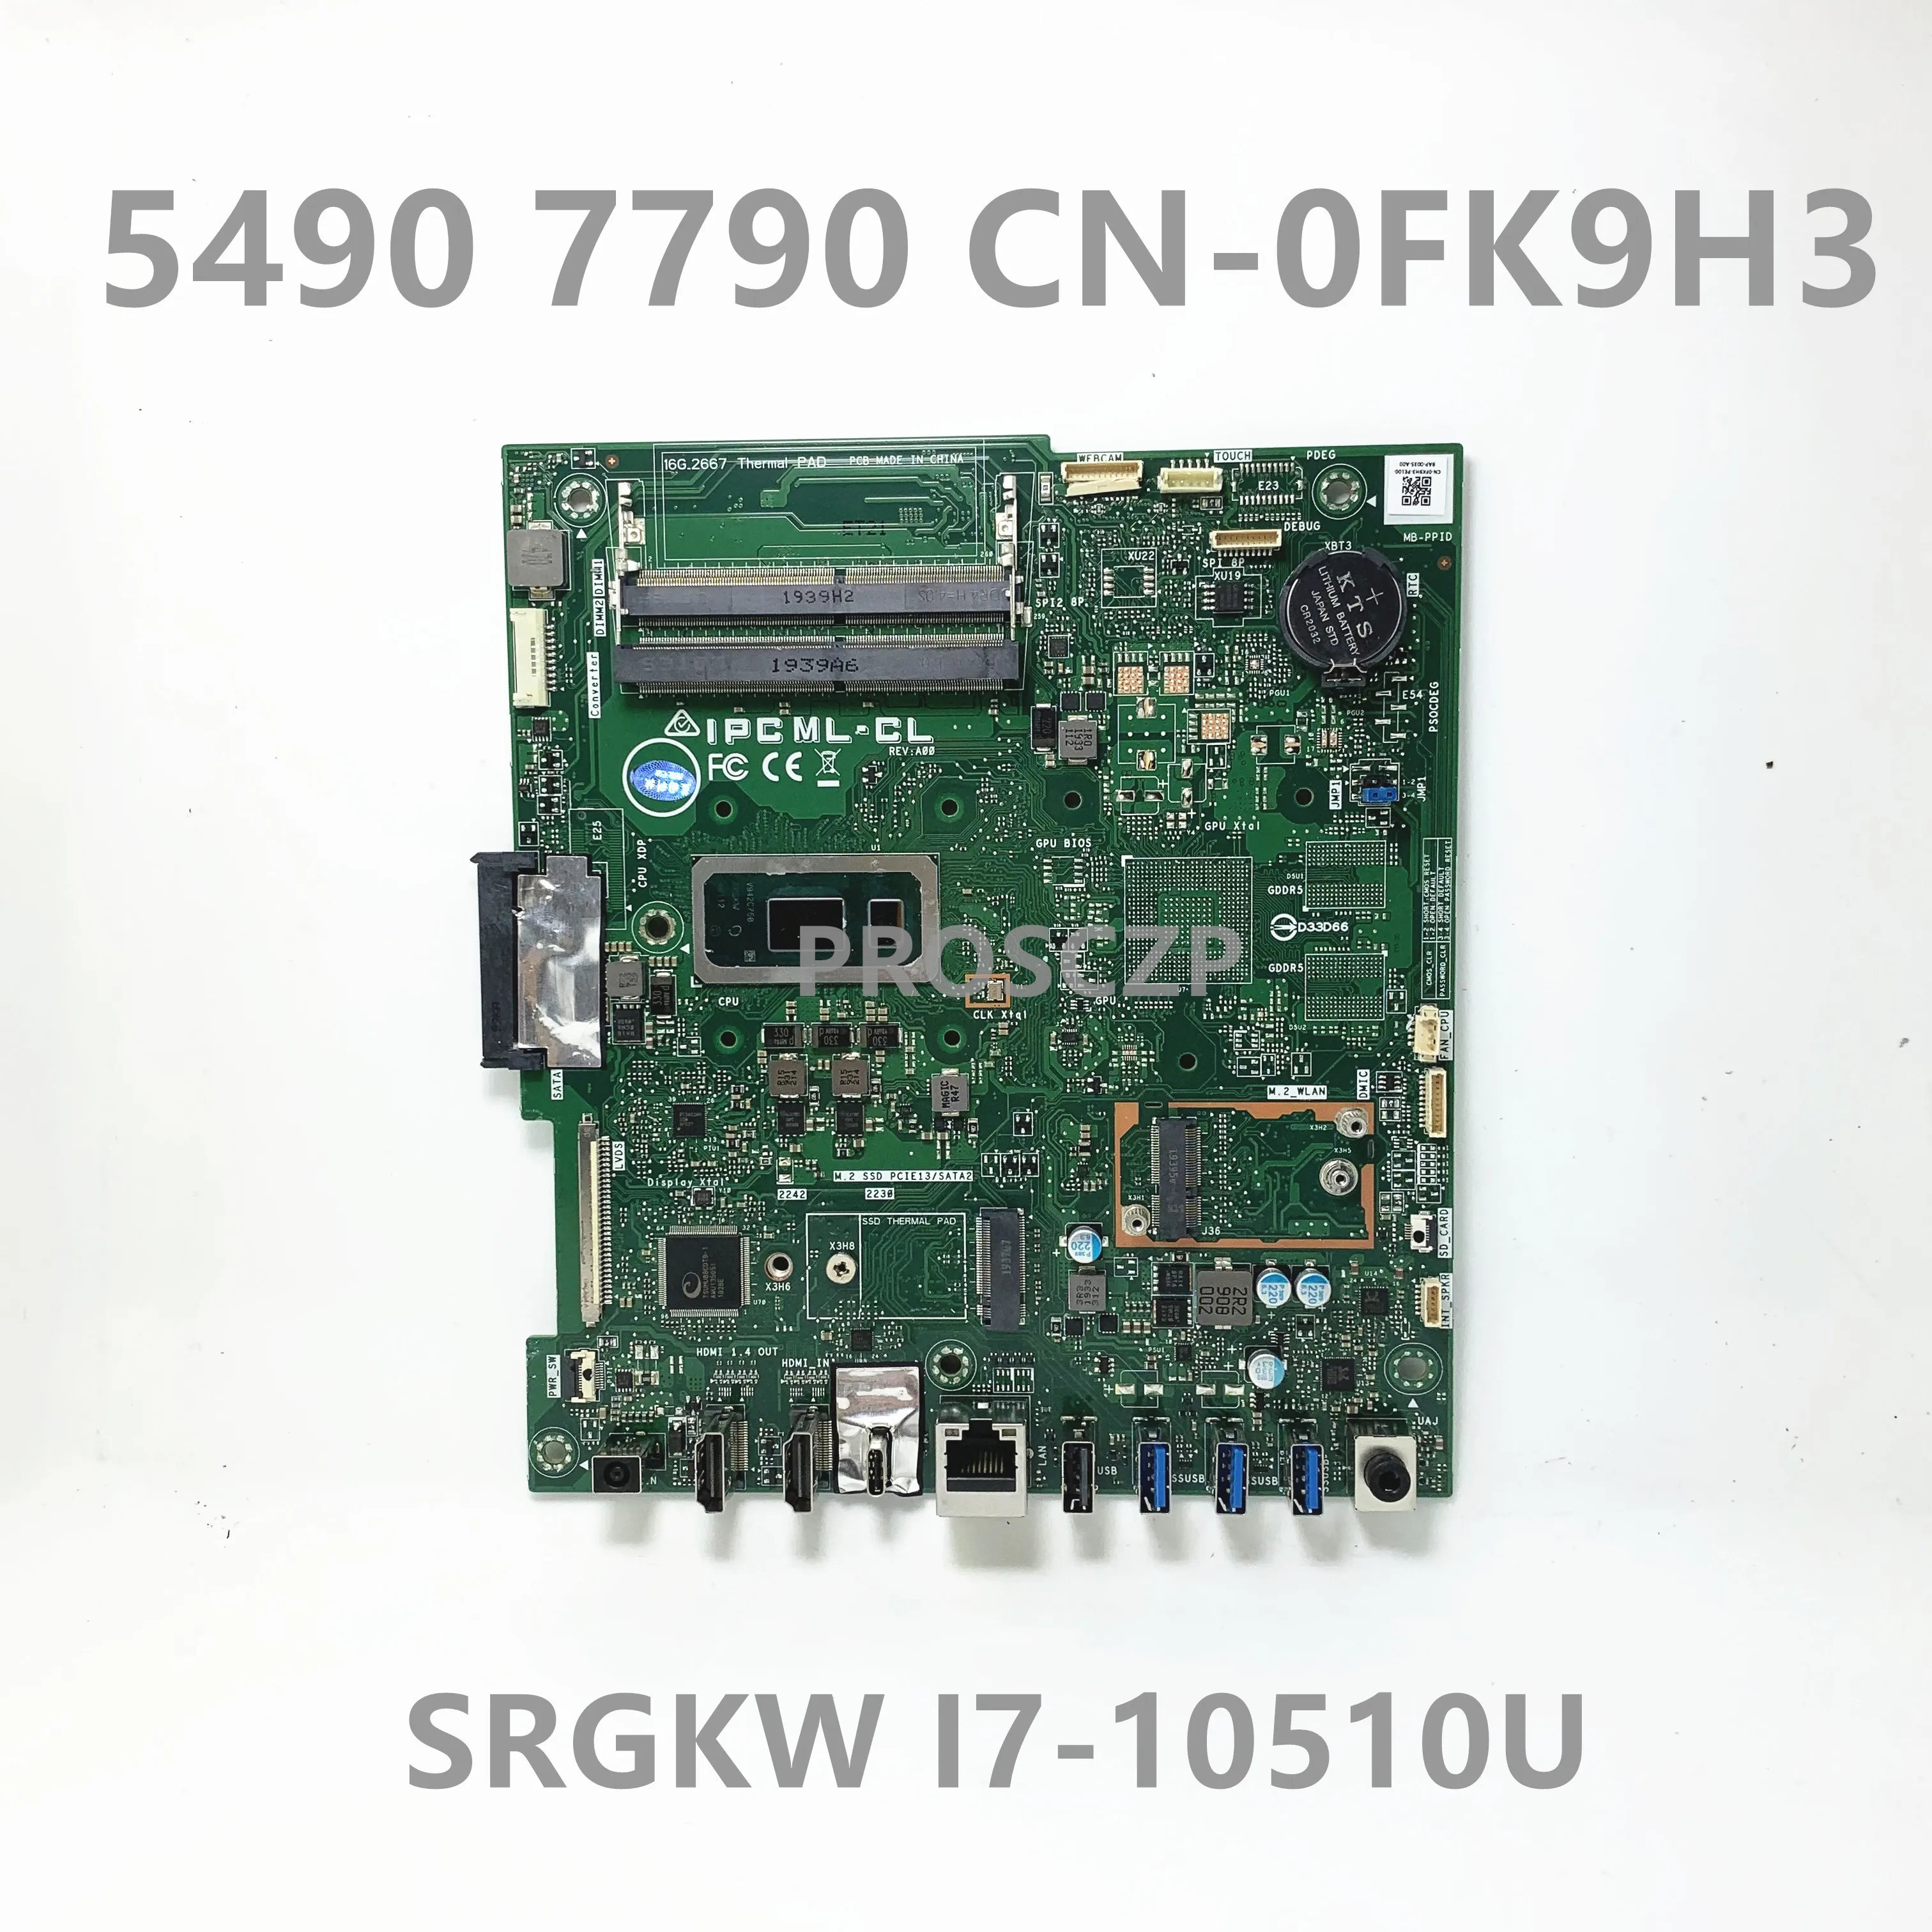 

CN-0FK9H3 0FK9H3 FK9H3 Mainboard For DELL 5490 7790 With SRGKW I7-10510U CPU Laptop Motherboard 100% Full Tested Working Well